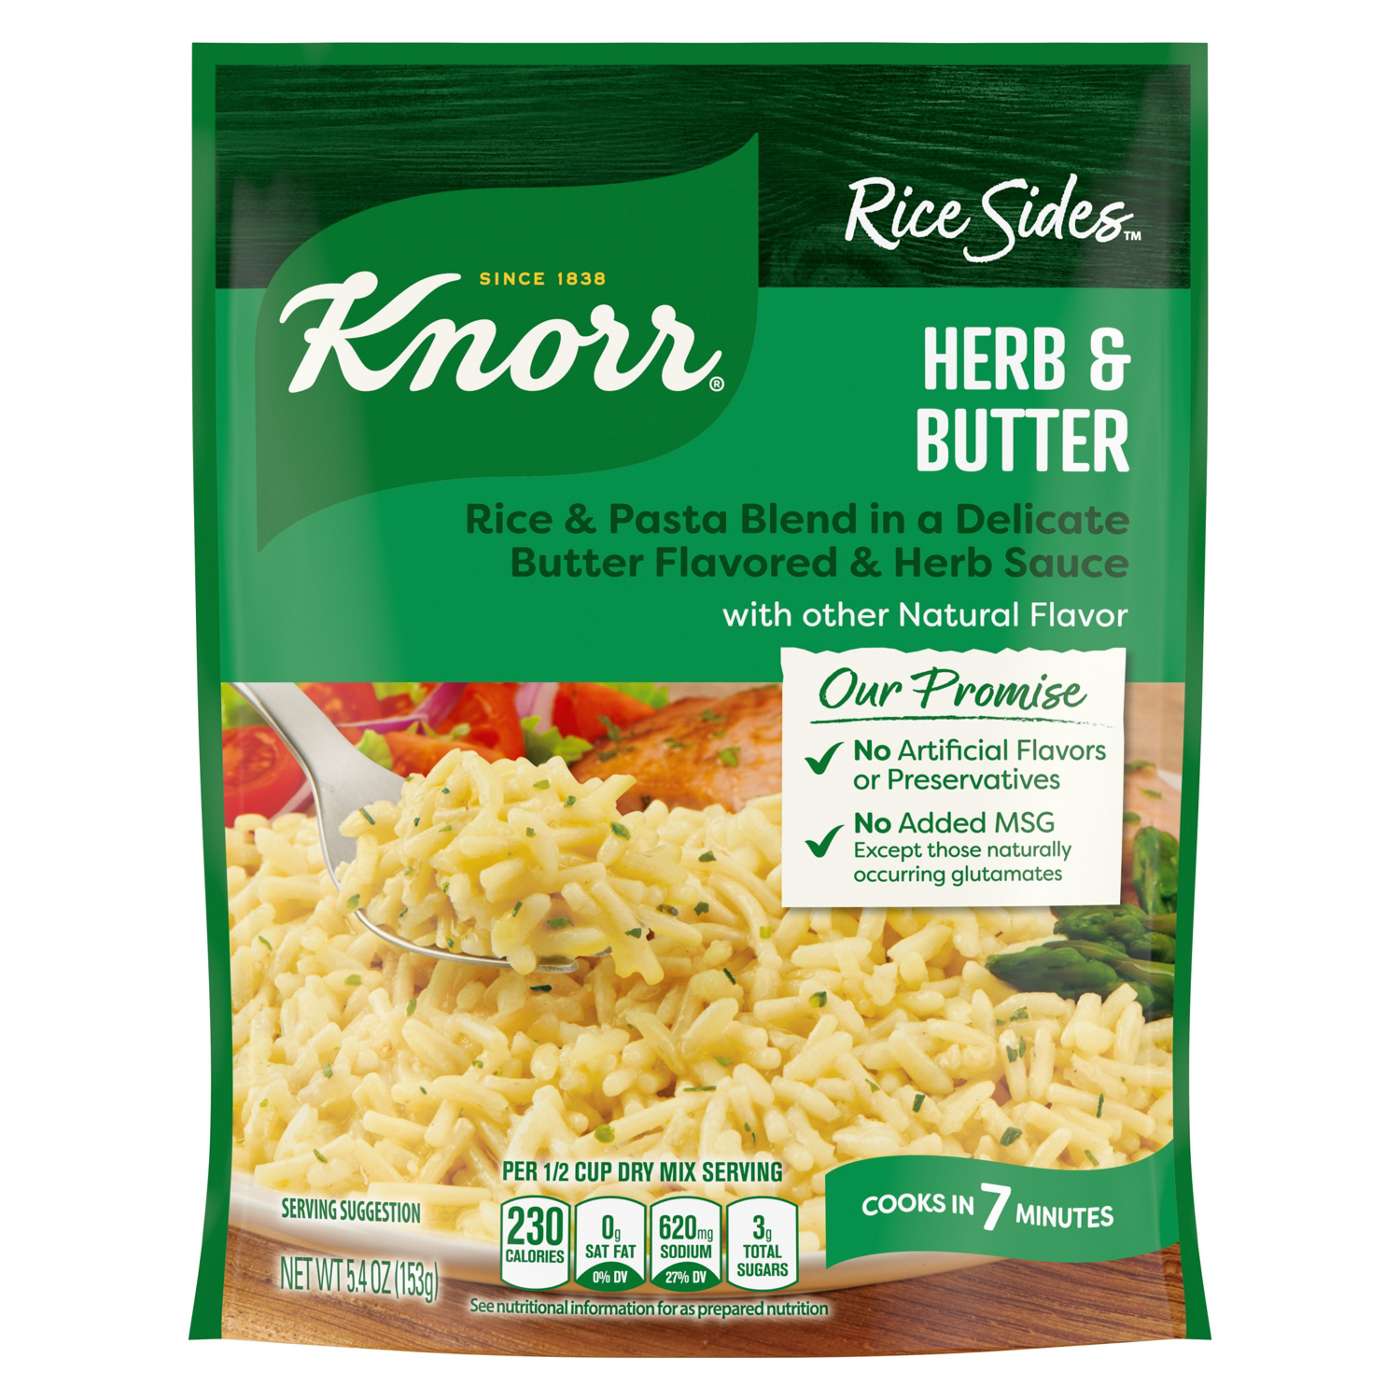 Knorr Rice Sides Herb & Butter Long Grain Rice and Vermicelli Pasta Blend; image 1 of 8